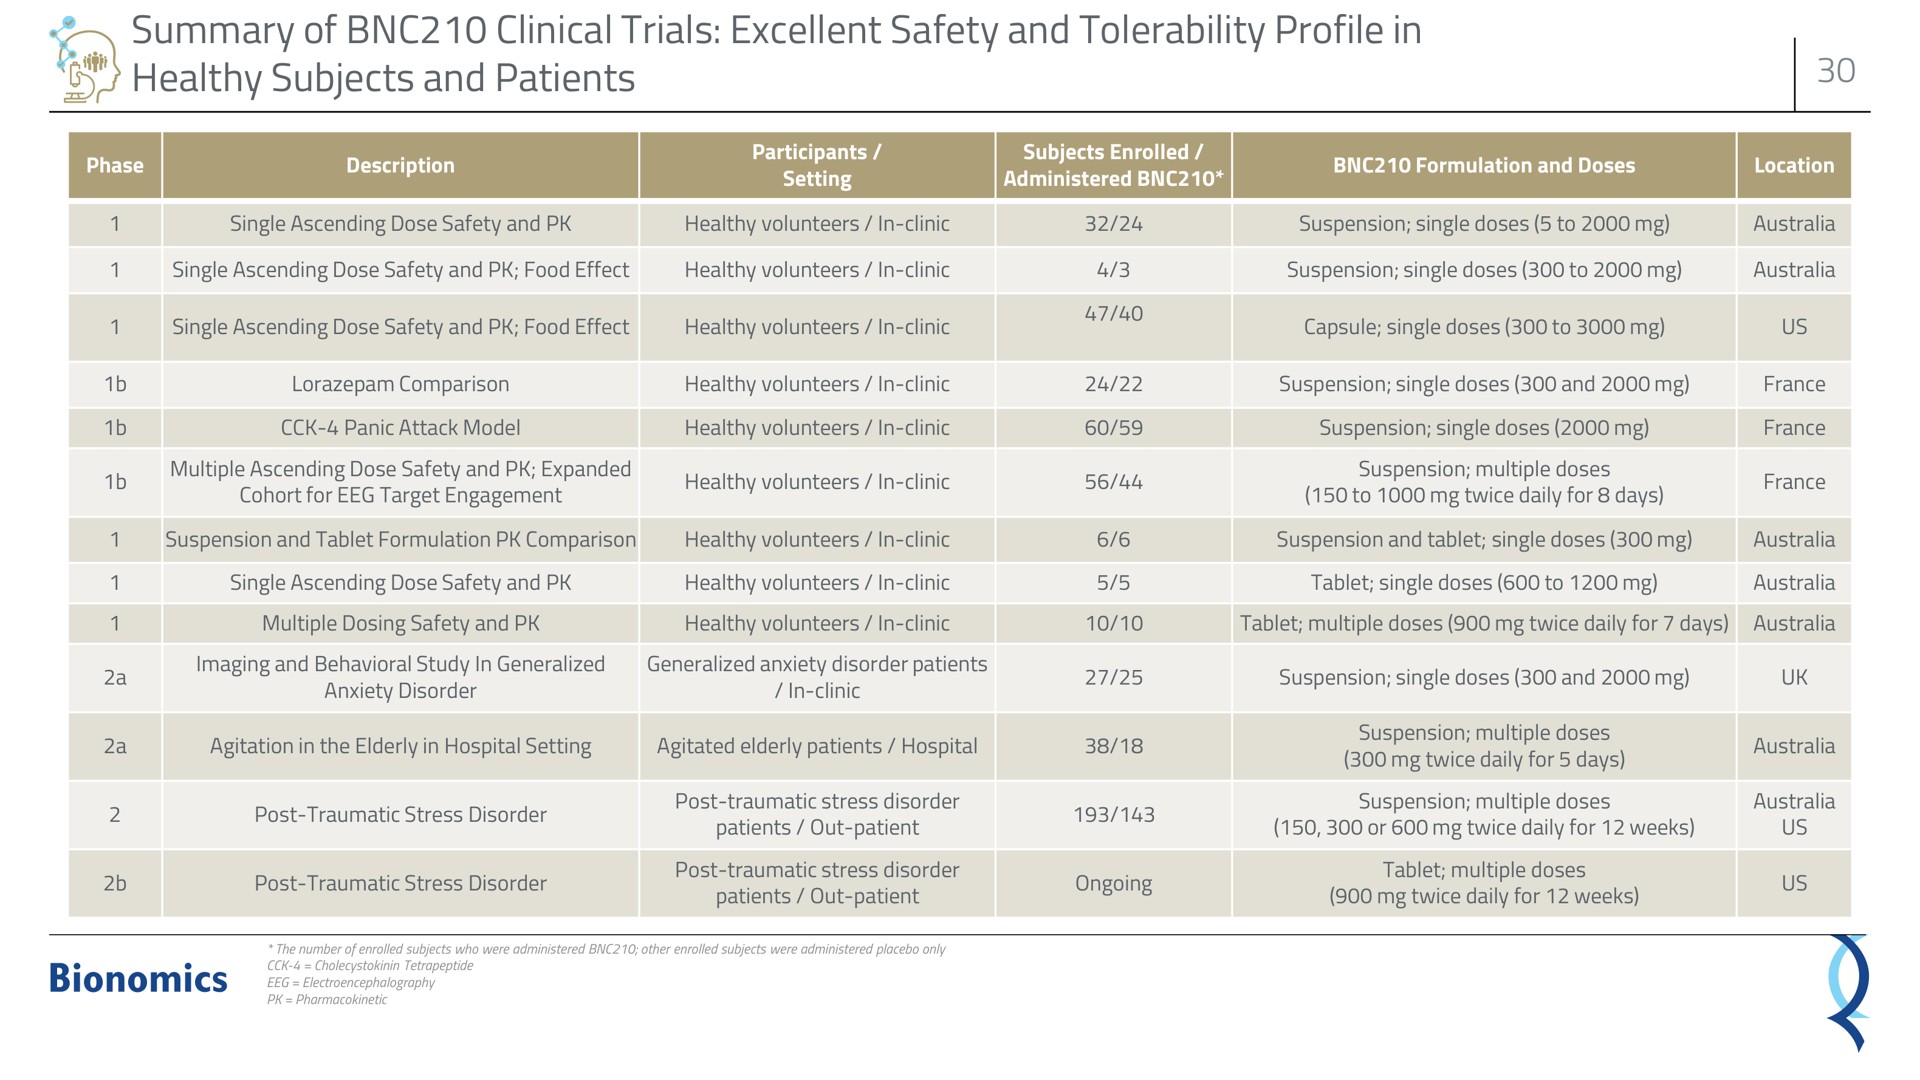 summary of clinical trials excellent safety and tolerability profile in healthy subjects and patients | Bionomics